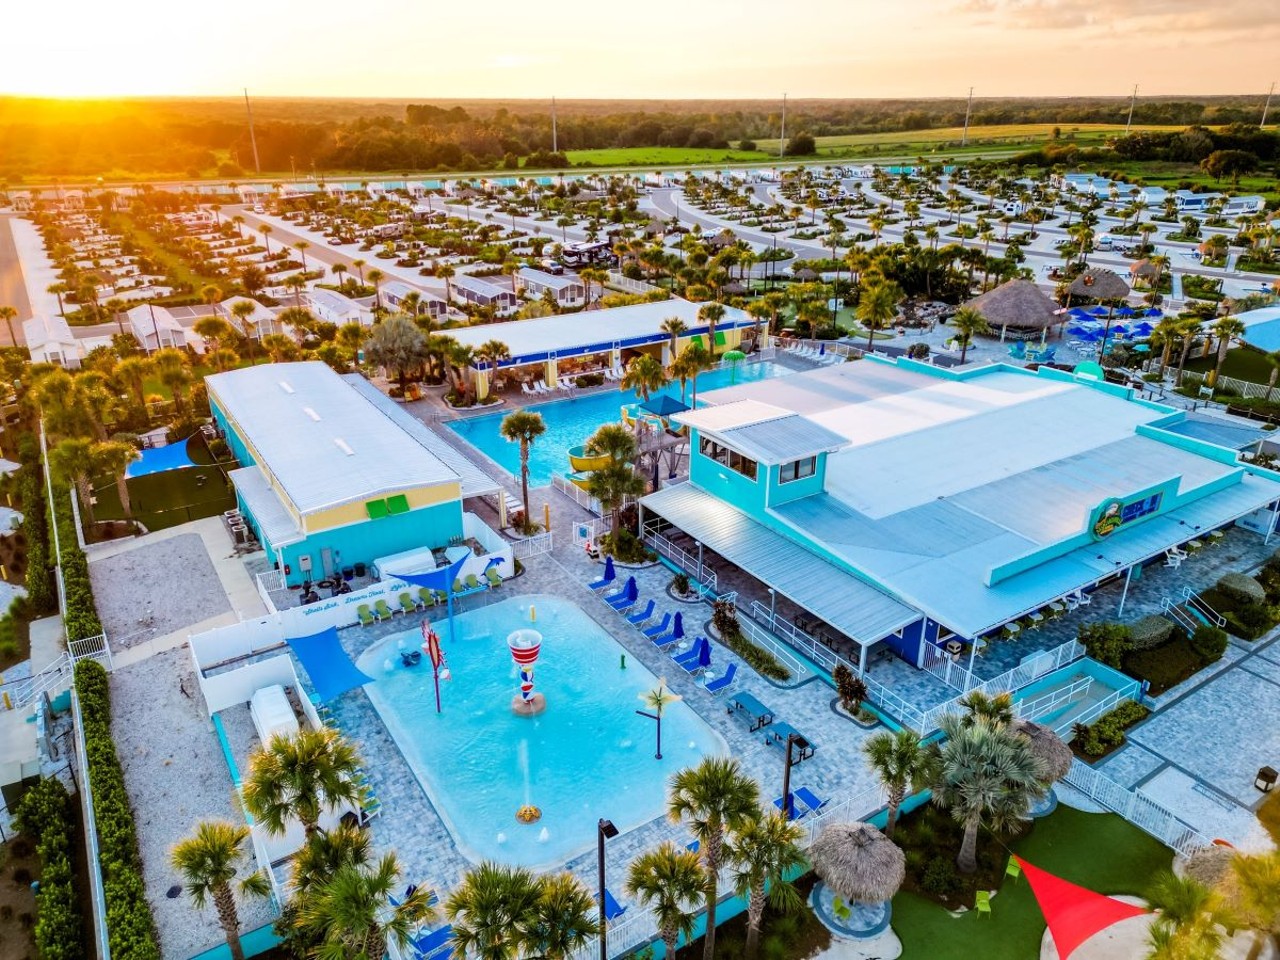 Camp Margaritaville Auburndale
361 Denton Ave., Auburndale, 863-455-7335    
$15-$35
Waste away again at Camp Margaritaville. The resort offers a $15 Twilight Pass, which is for evening dips and comes with pool access starting at 5 p.m. There are poolside games like cornhole and mini golf, and Tiki Bar specials until 7 p.m. The full-day pass is an additional $20 but gives all-day access to the pools and amenities including the fitness center.
Photo via Camp Margaritaville Auburndale/Facebook